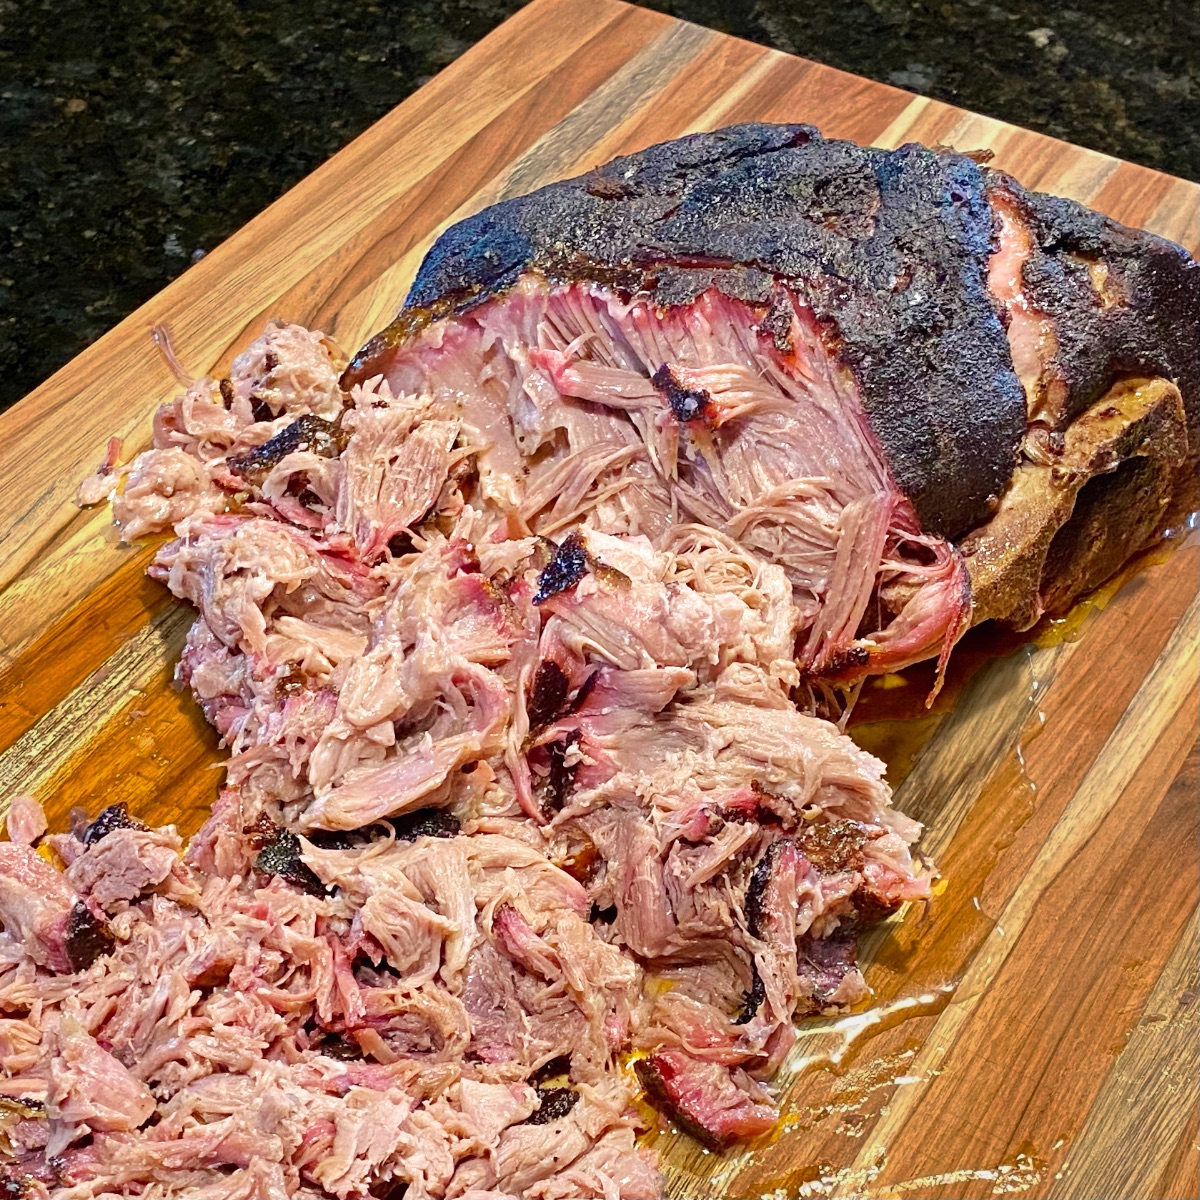 Smoked pork butt on a cutting board with half of it shredded (pulled). Image shows the smoke ring and how juicy it is.